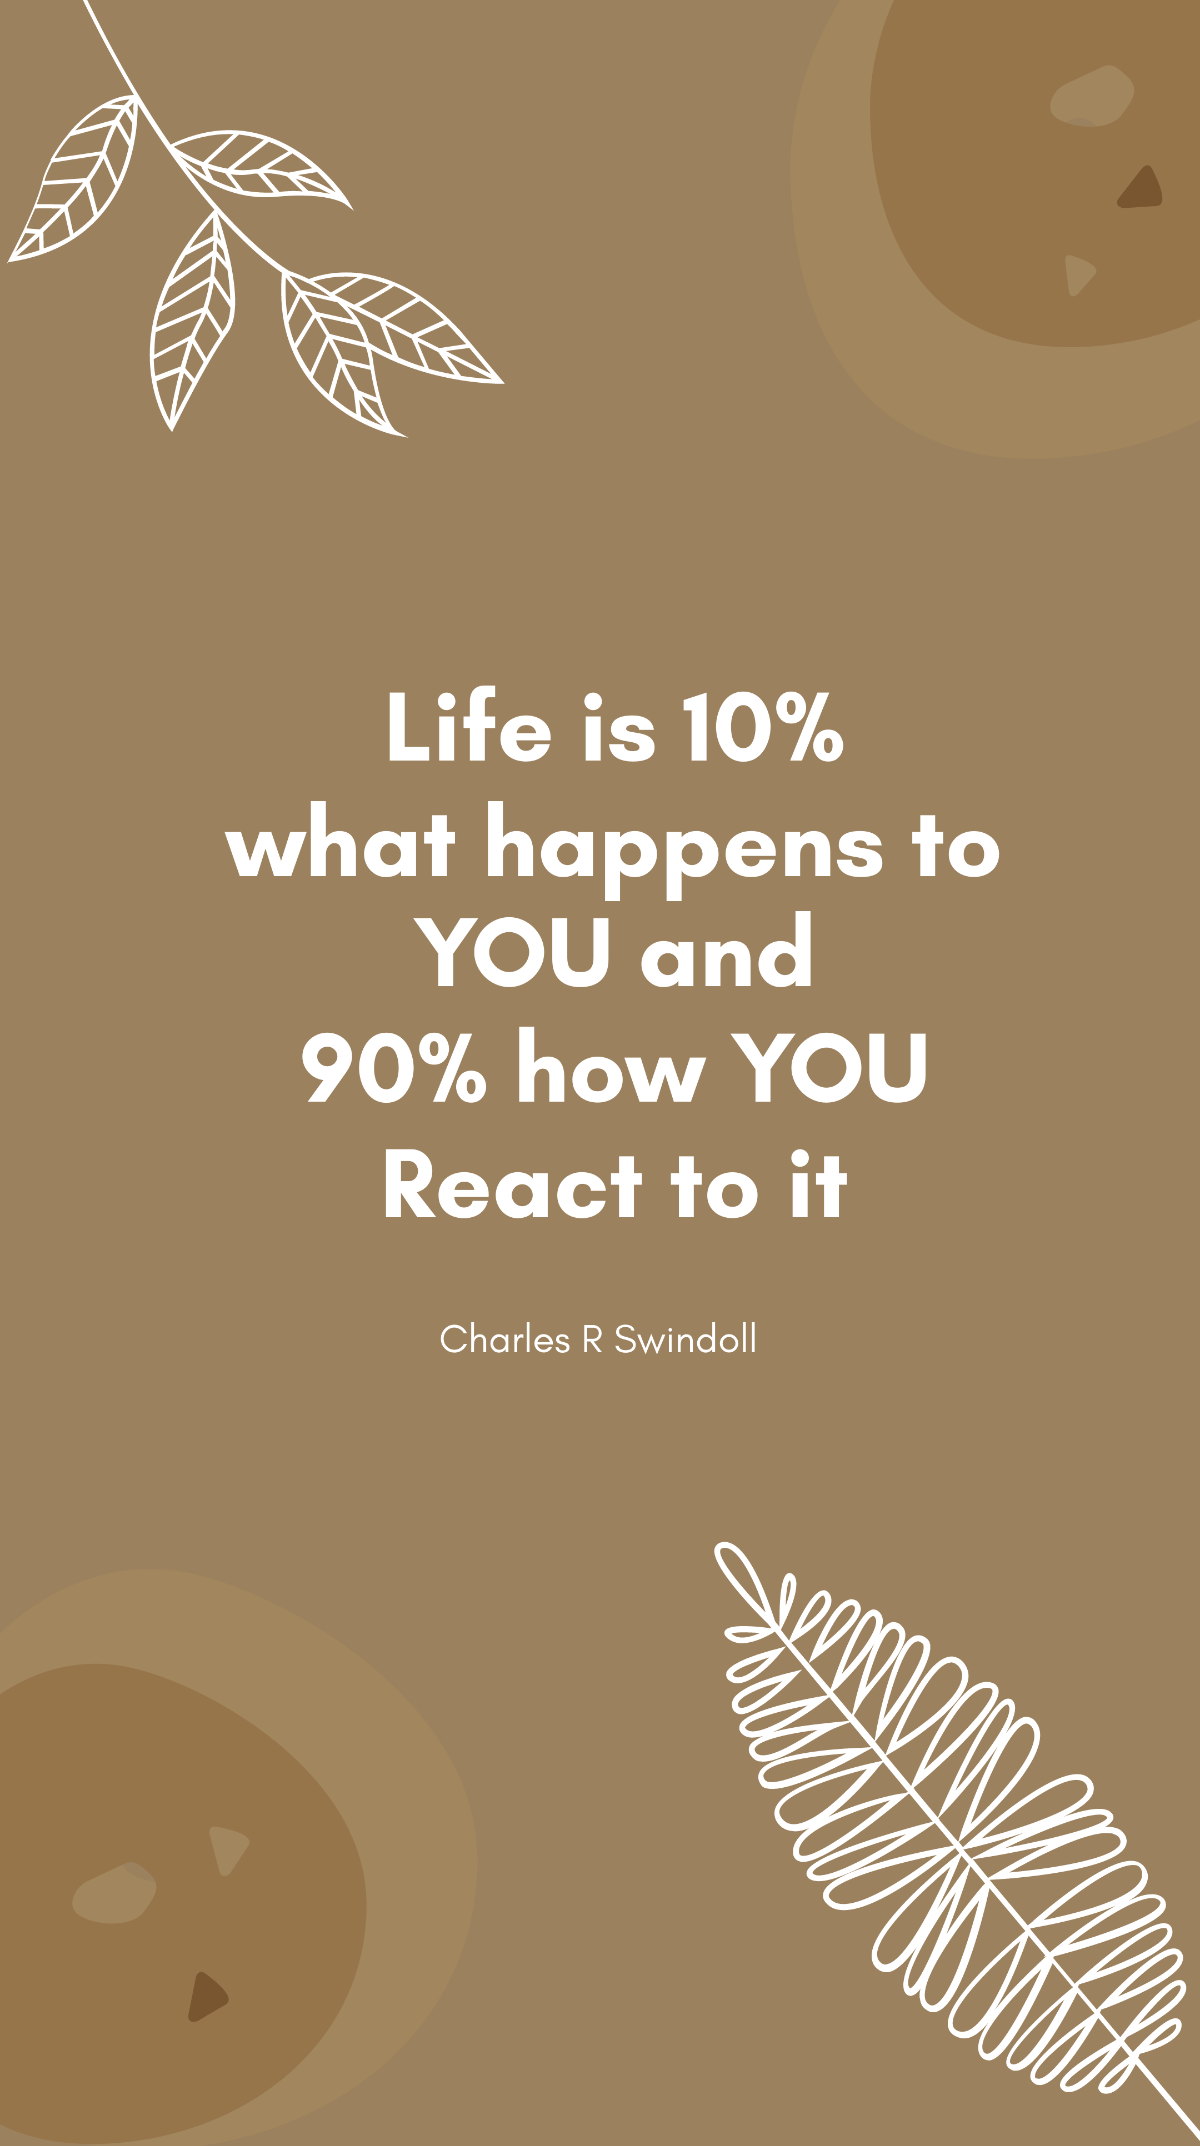 Charles R Swindoll - Life is 10% what happens to you and 90% how you react to it Template